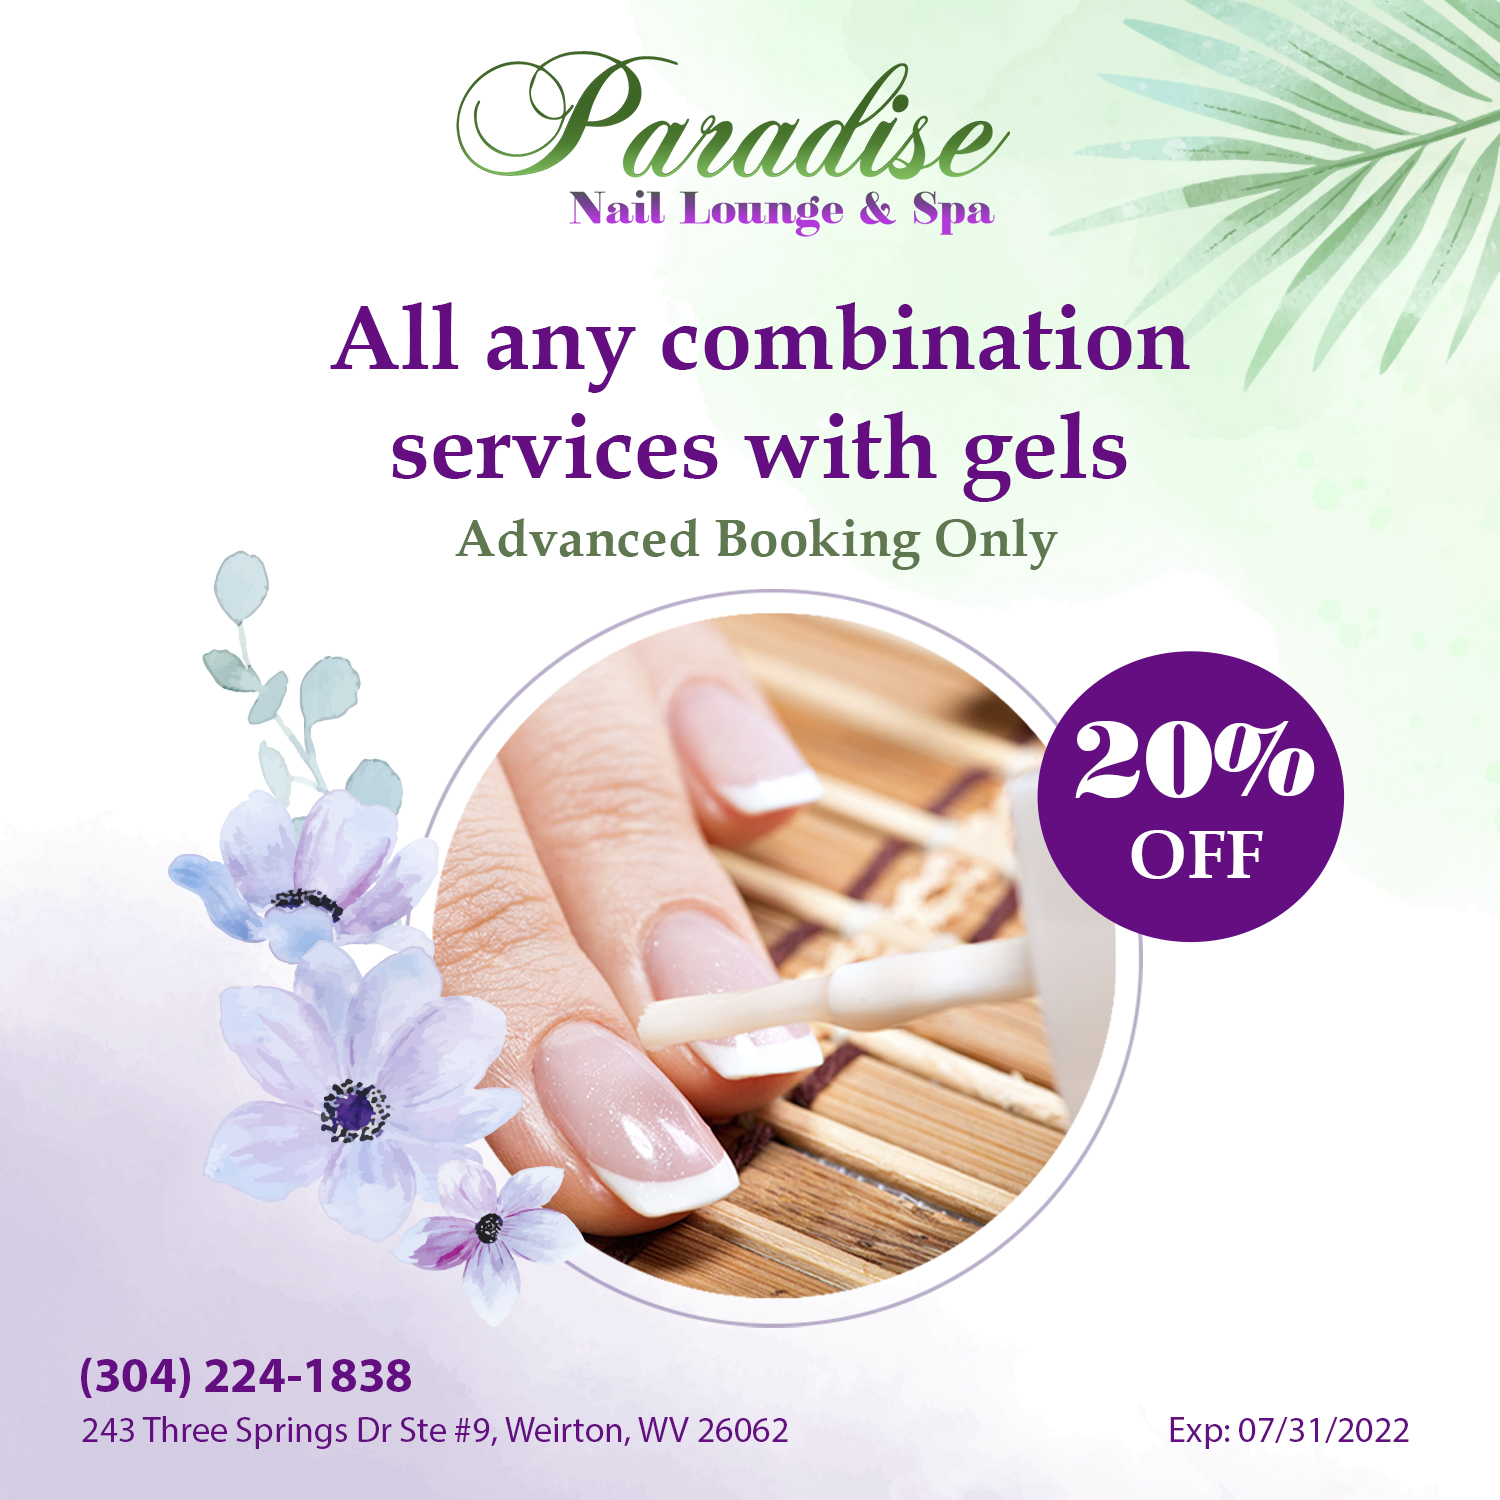 Paradise Nails Lounge and Spa